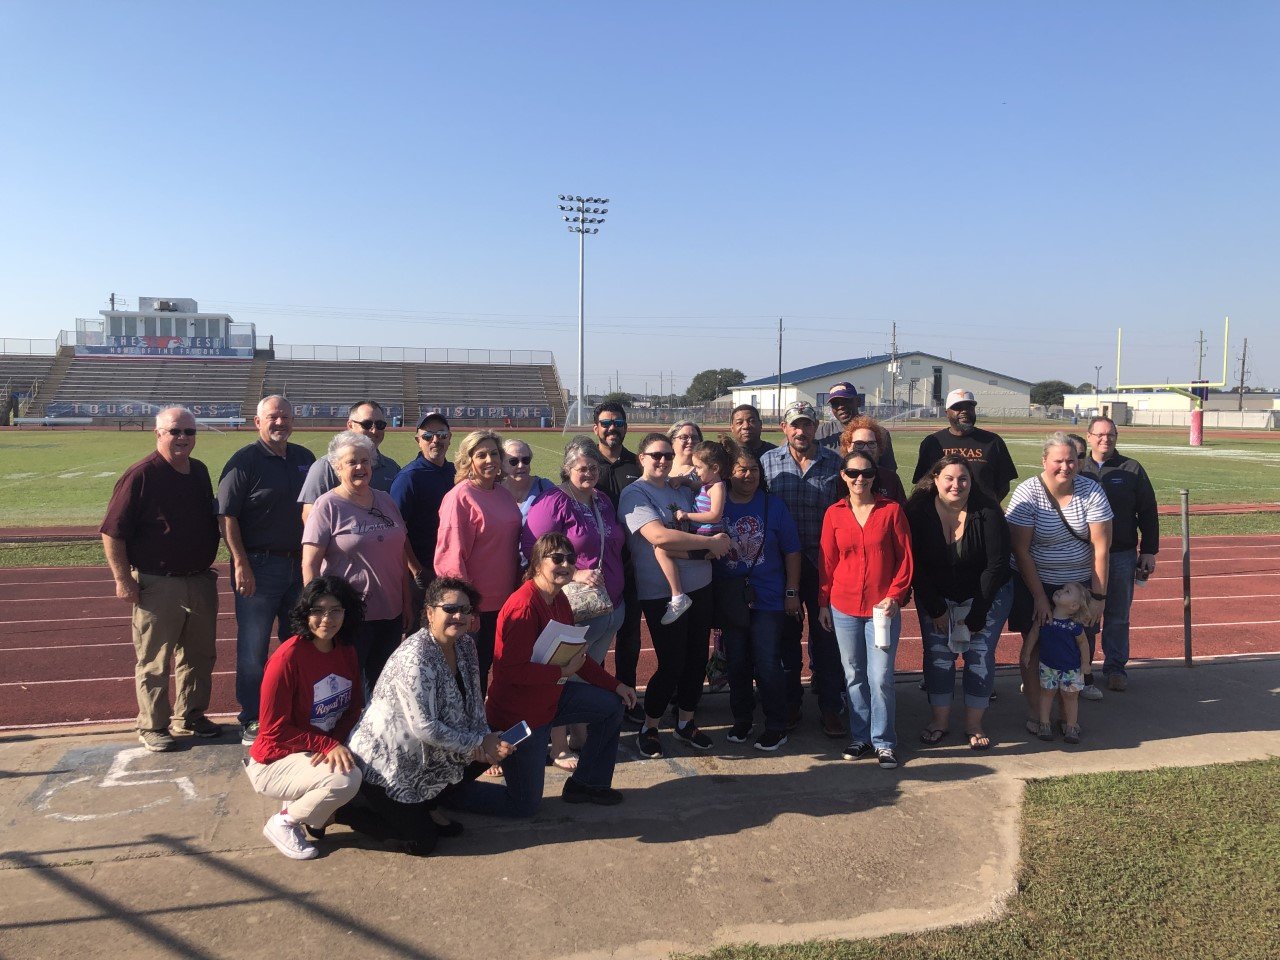 Members of the Royal ISD Facilities Advisory Committee gather at Falcon Stadium as part of an area tour in which district officials described the forthcoming housing developments in the area. Officials said the district expects about 22,000 homes, and an estimated new 13,000 students, in the next few years.